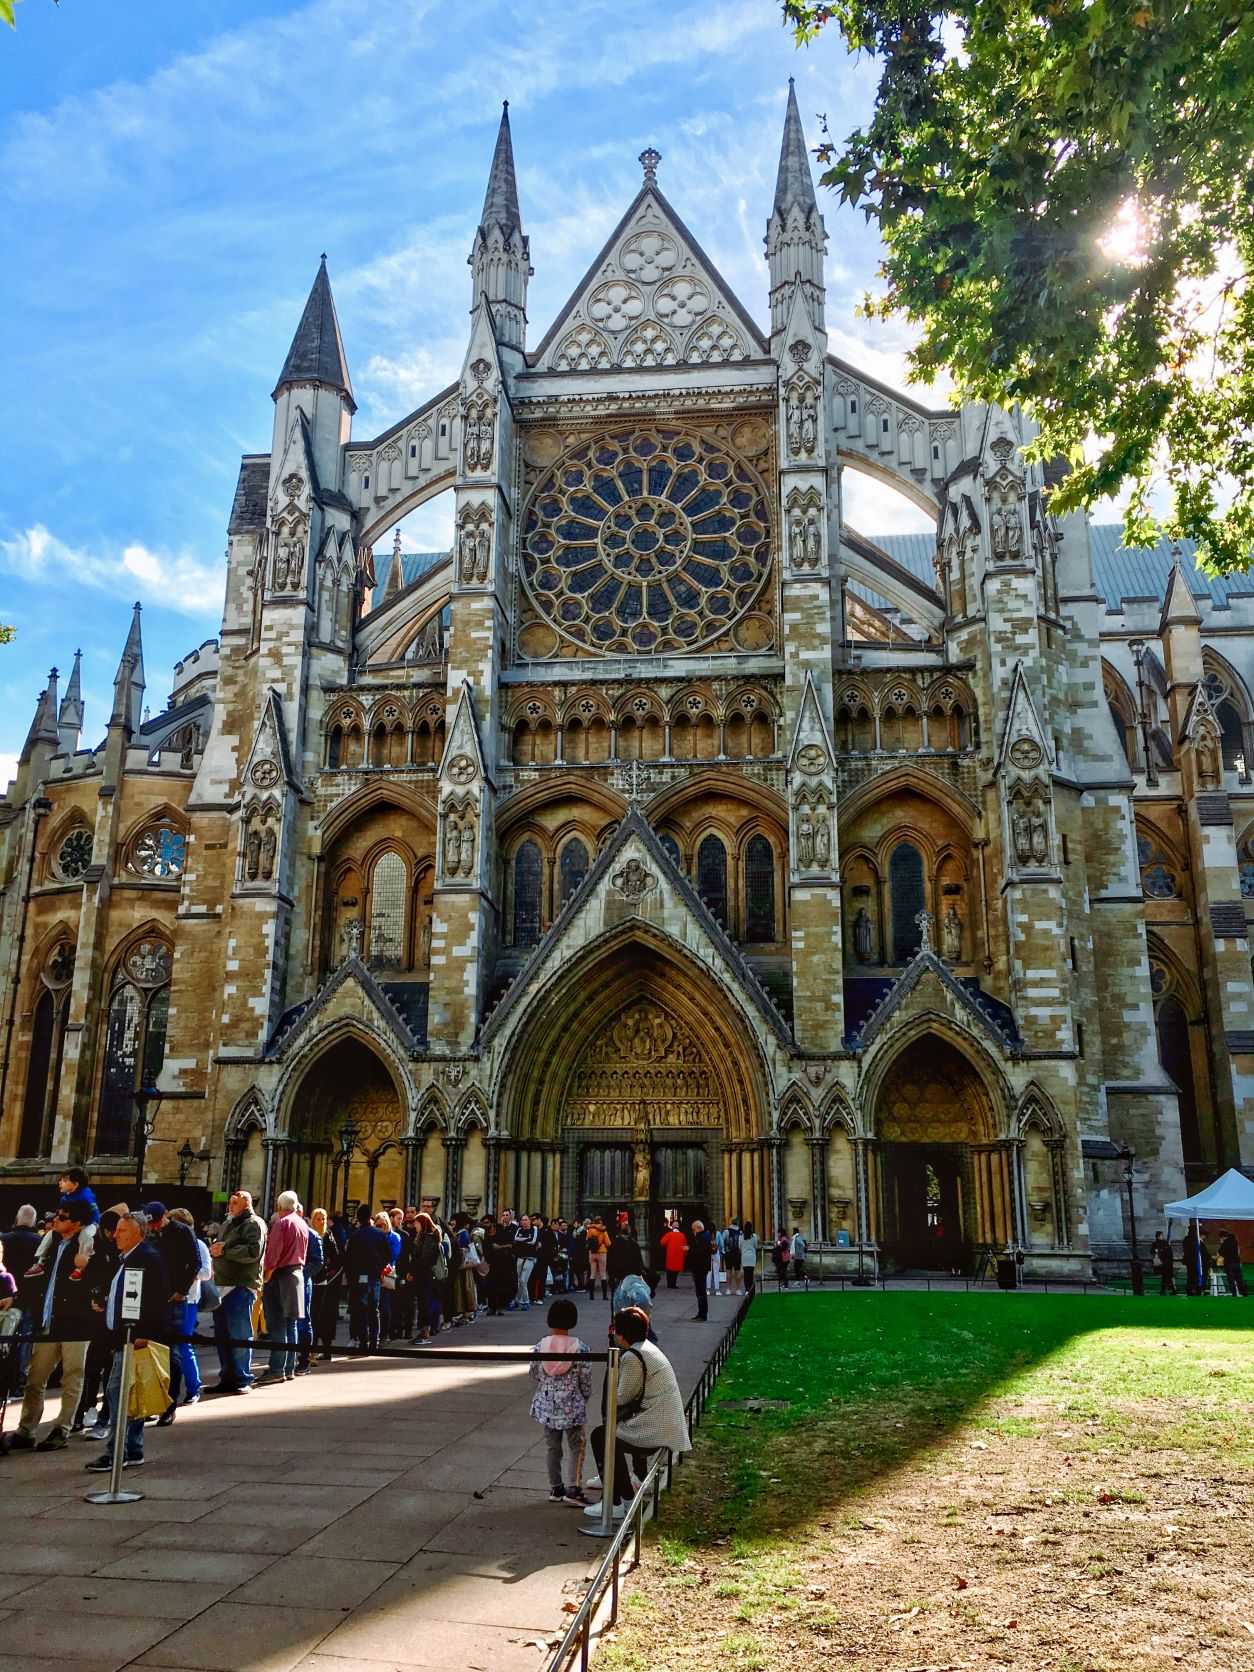 Westminster Abbey is an iconic church found in London's Westminster. It's right next to the British Parliament and Big Ben.